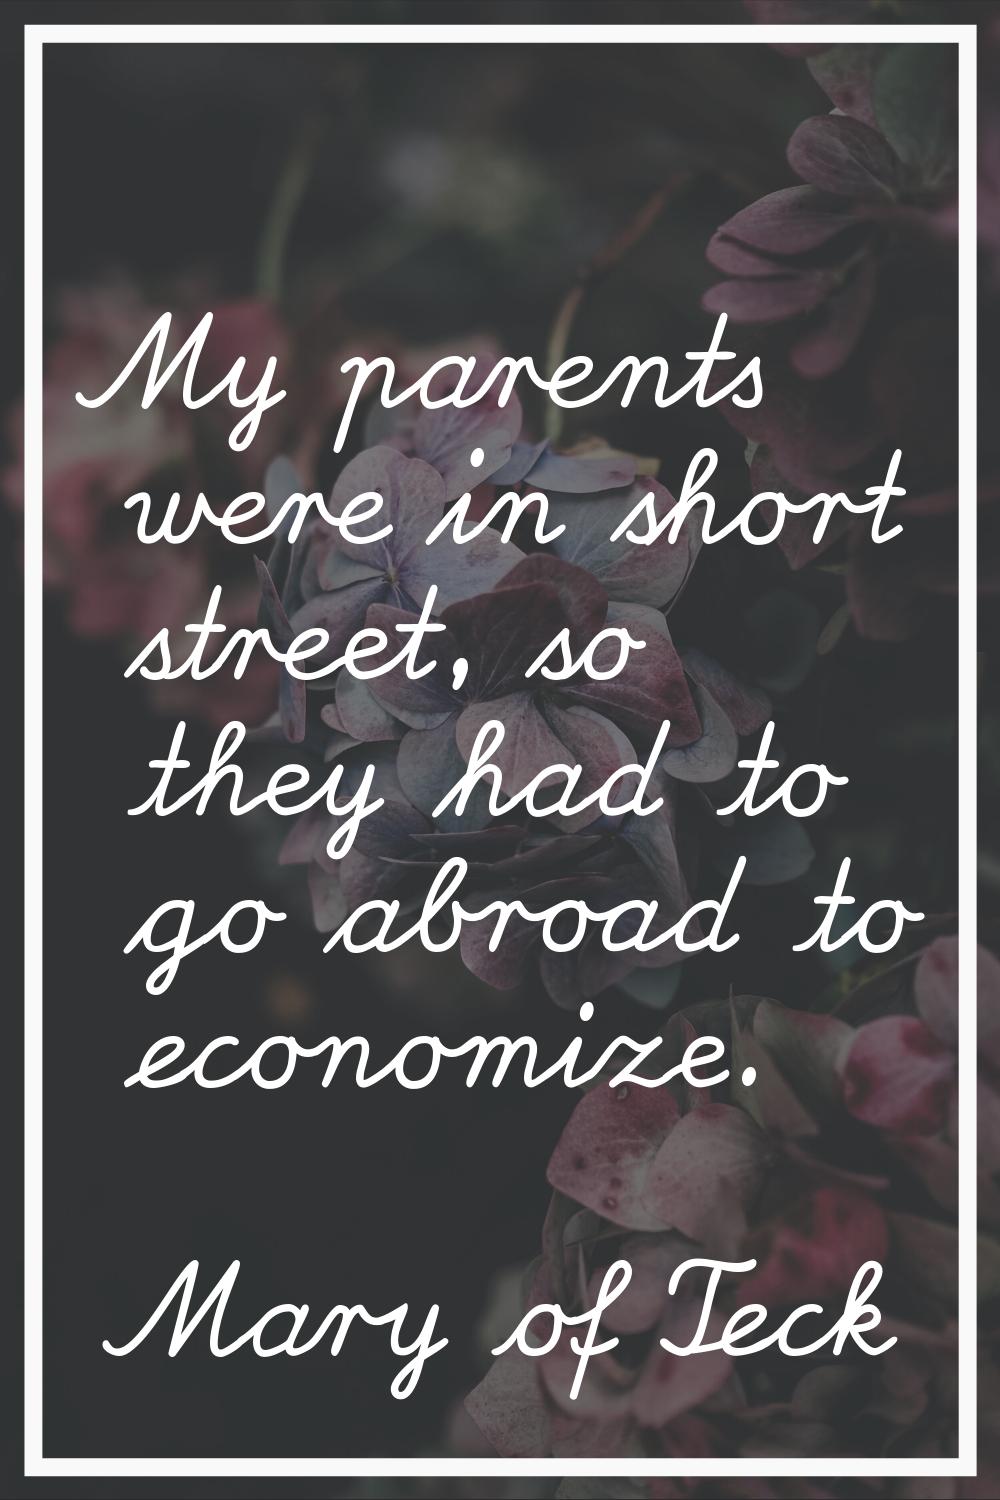 My parents were in short street, so they had to go abroad to economize.